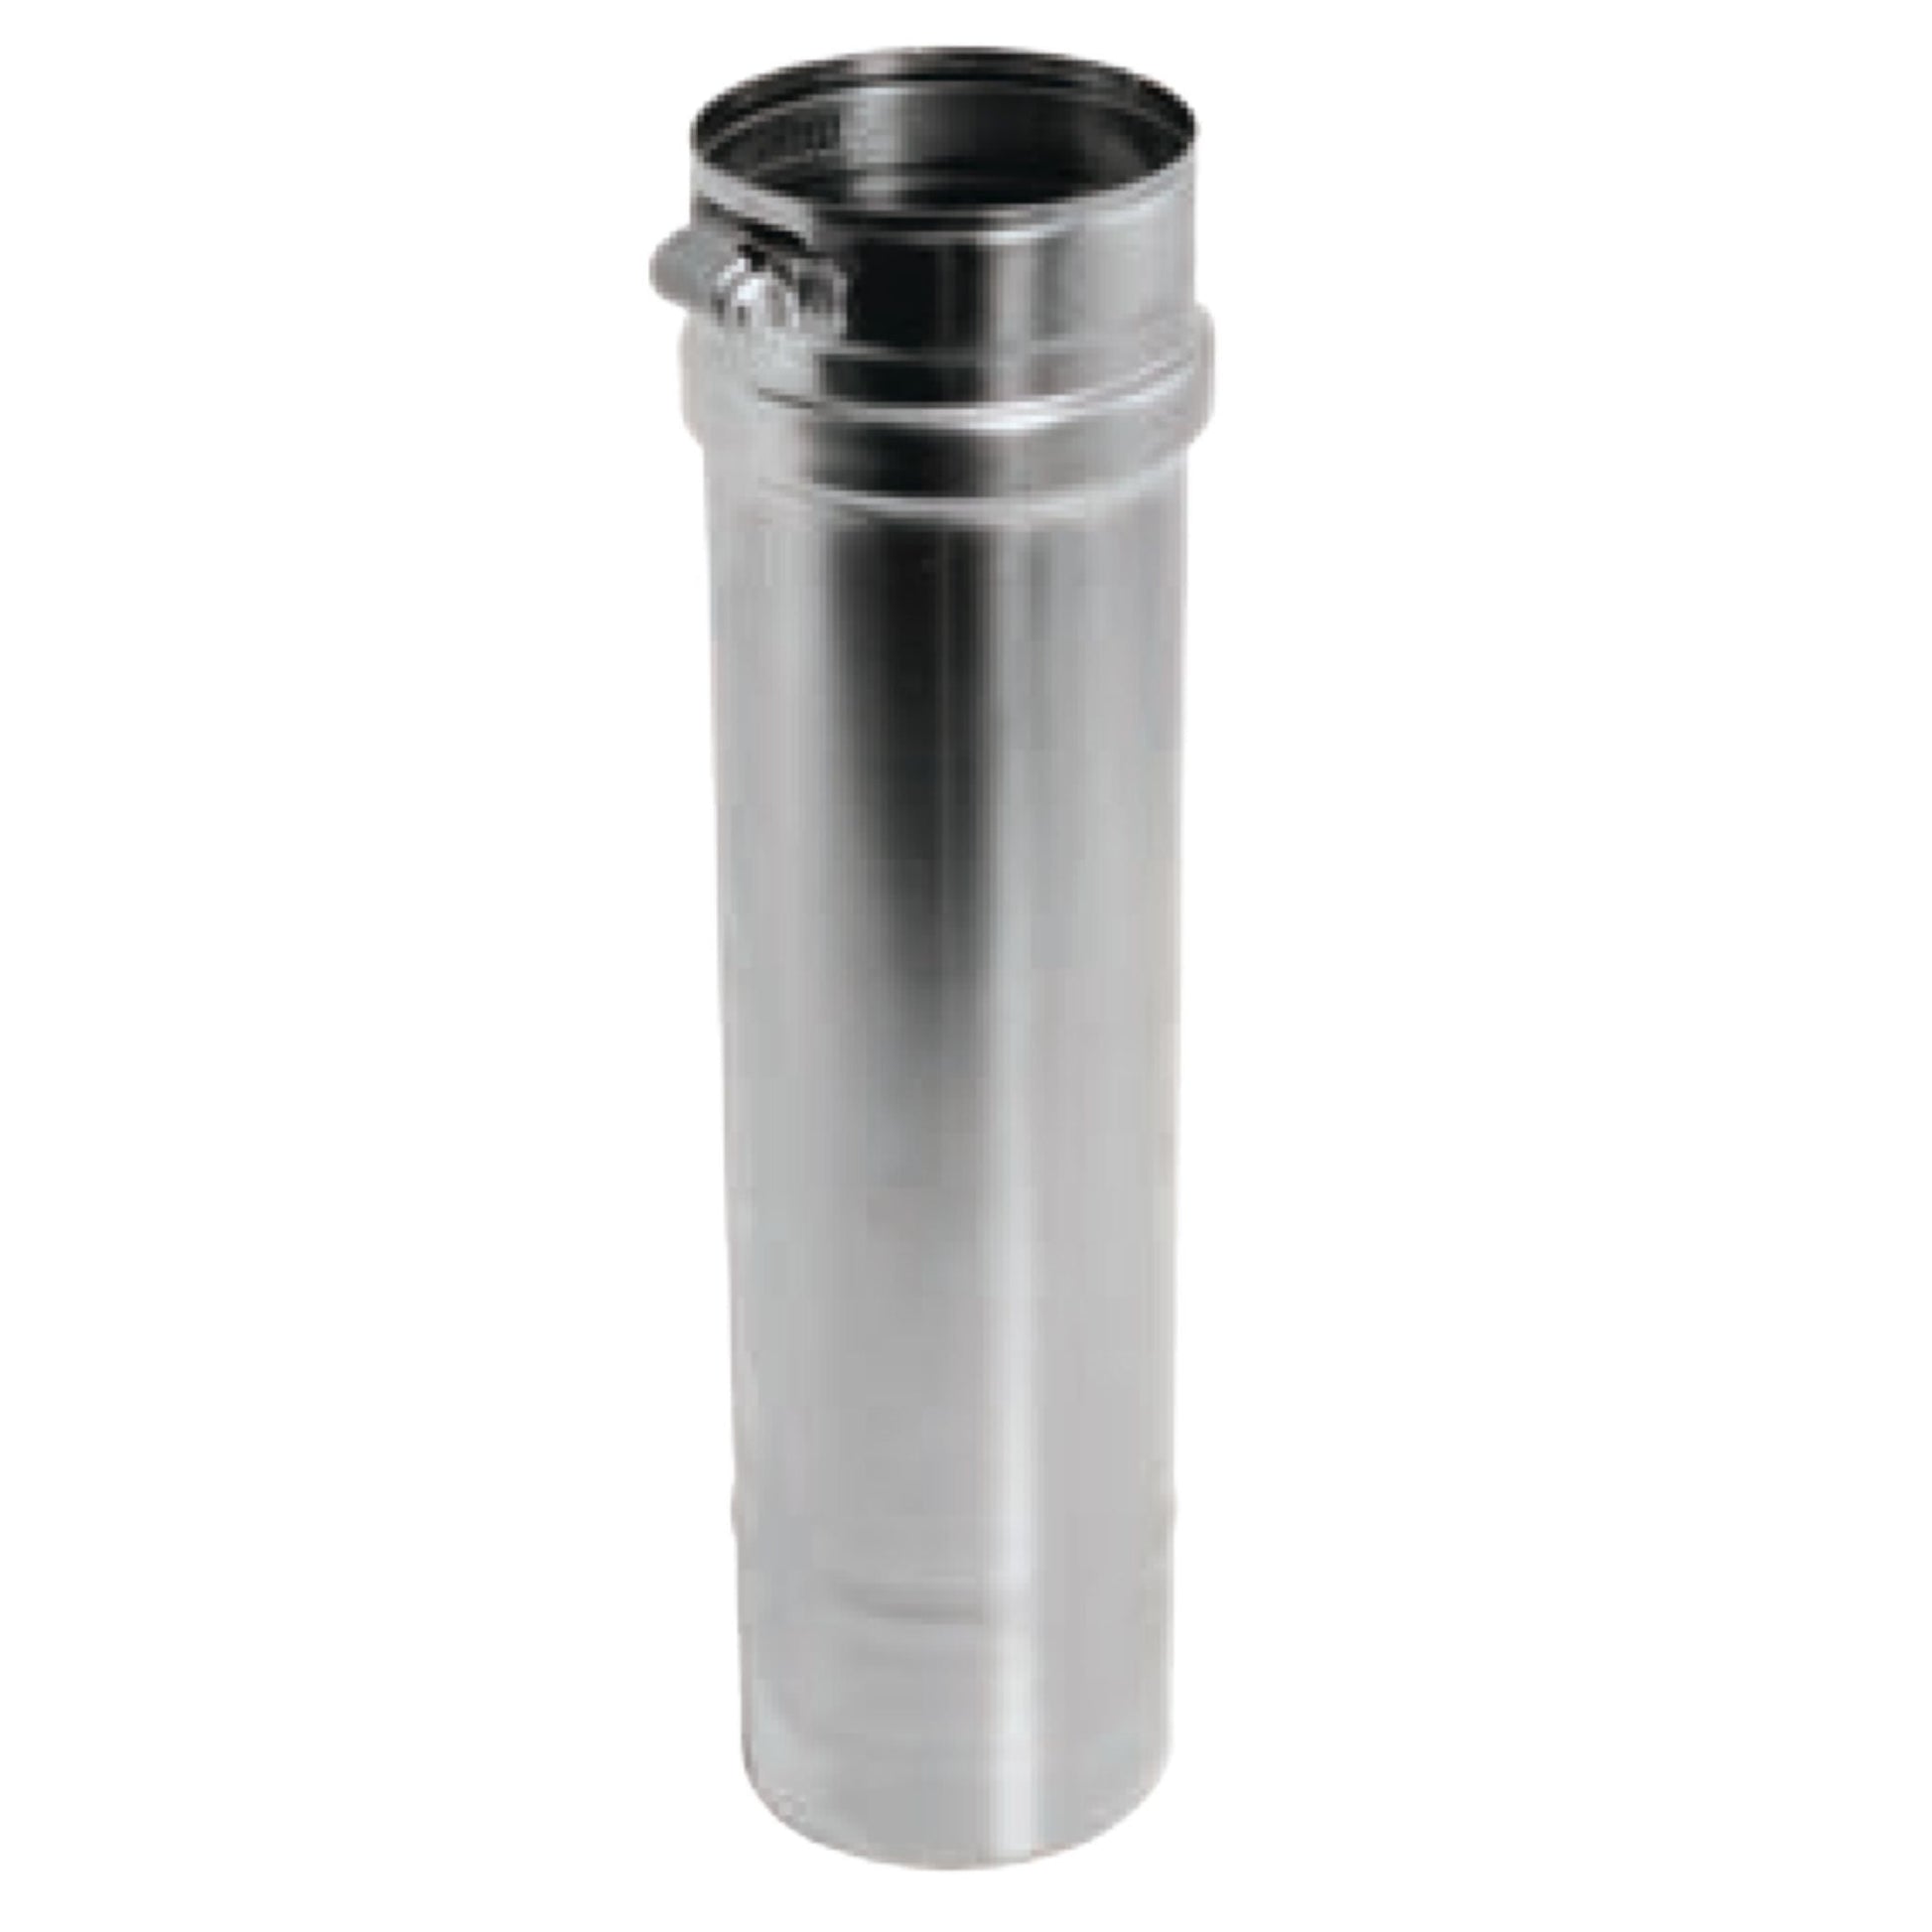 DuraVent FasNSeal 16" x 24" 316L Stainless Steel Vent Length